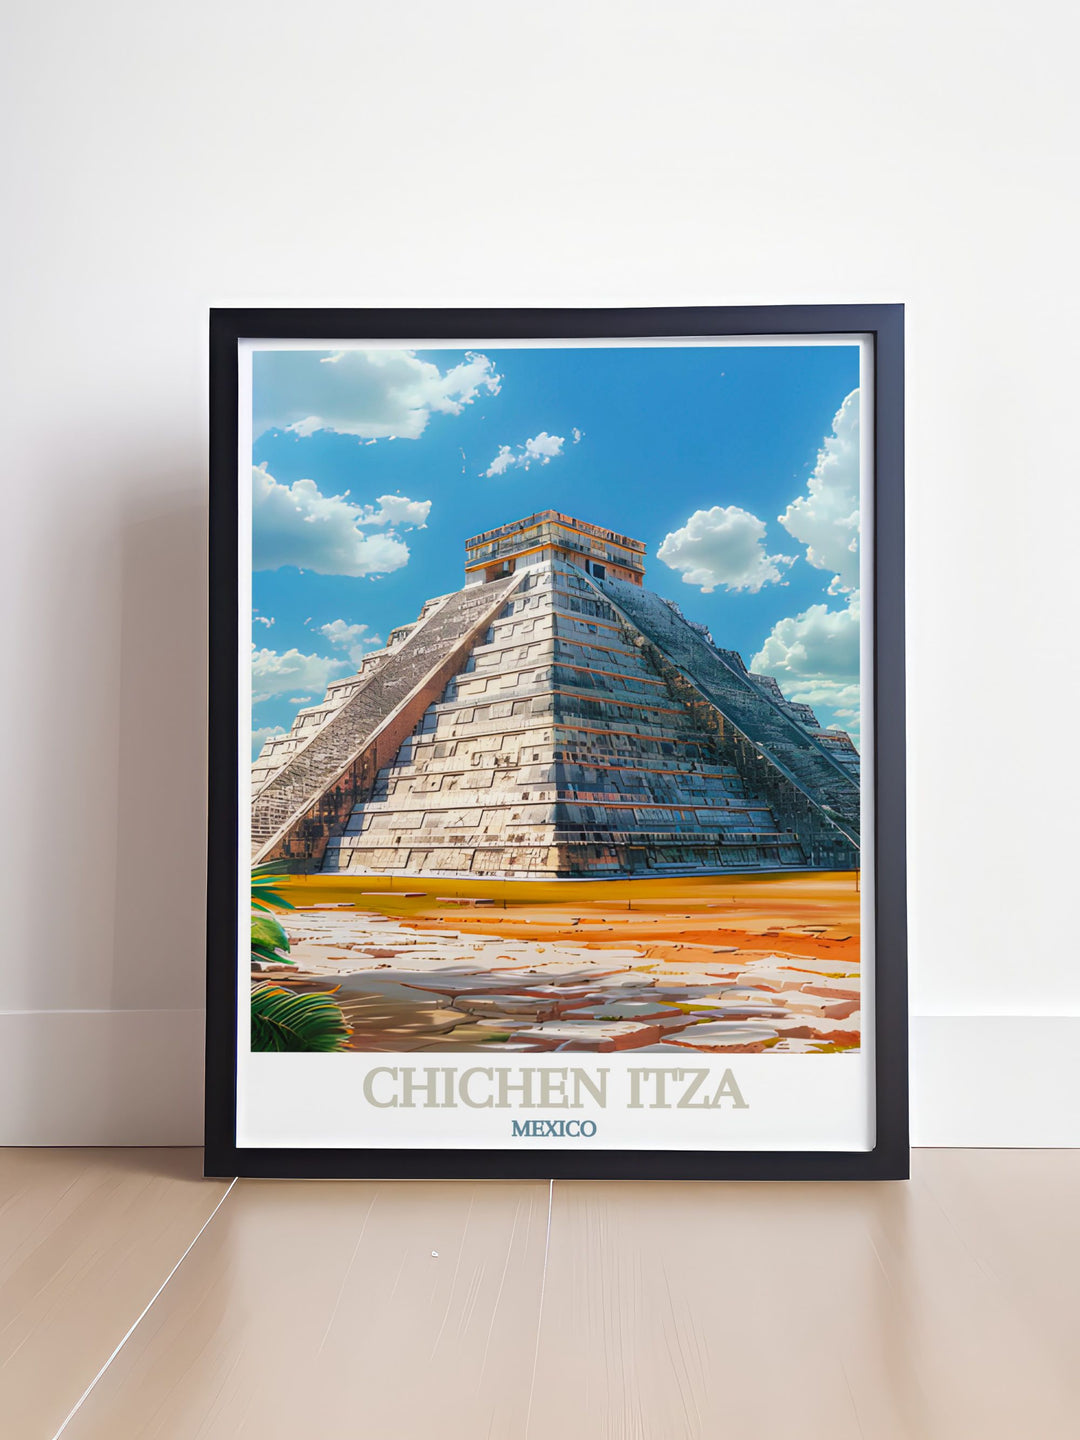 Showcasing the impressive structure of El Castillo, this poster adds a unique touch of Mexicos ancient heritage to your decor. Experience the wonder of Chichen Itza with this art print, highlighting the pyramids architectural brilliance and cultural significance.